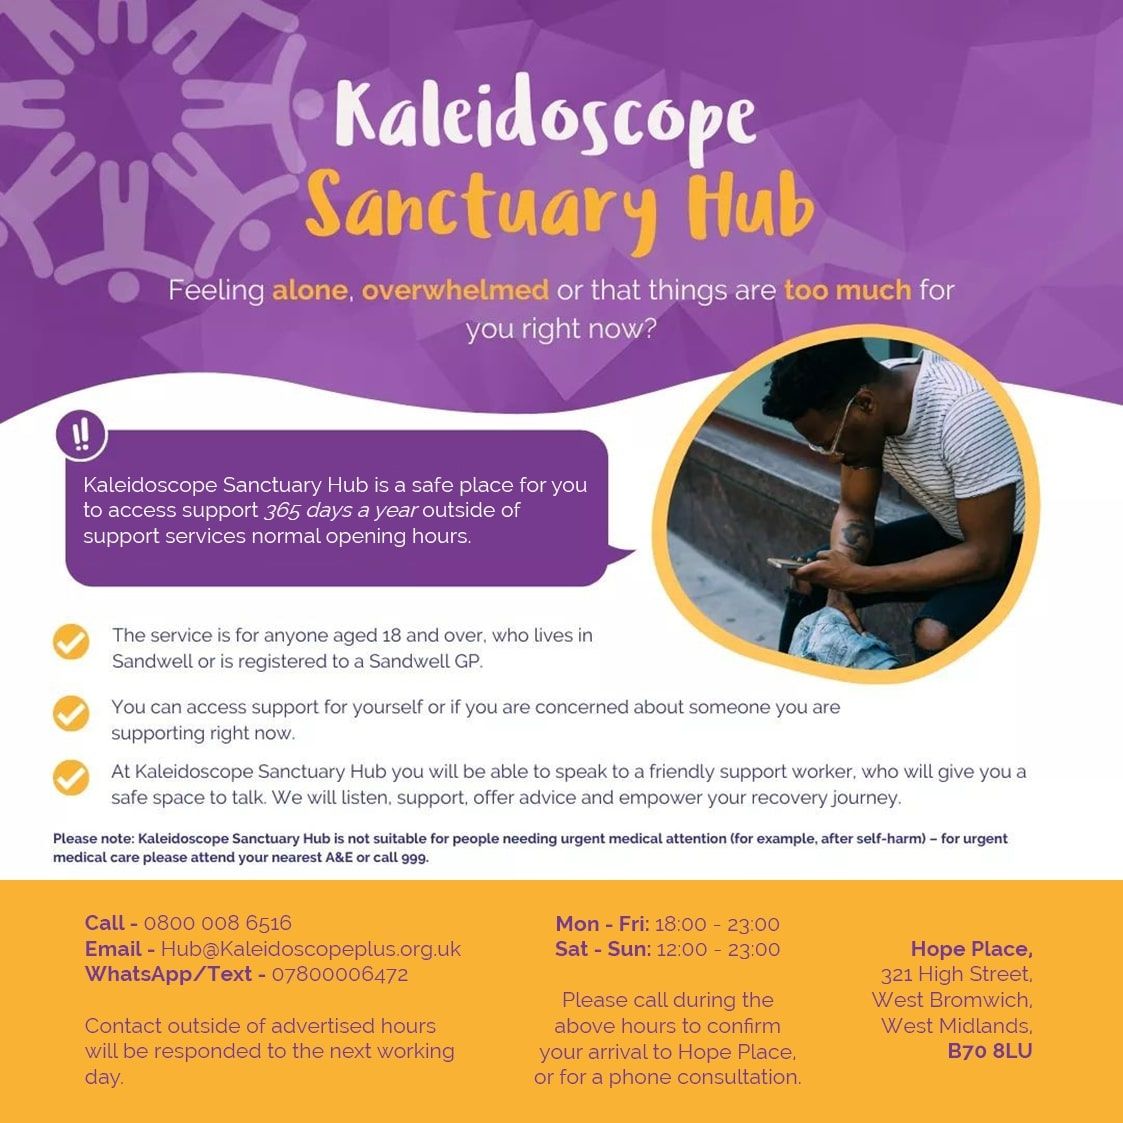 Kaleidoscope Sanctuary Hub Feeling alone, overwhelmed or that things are too much for you right now? Kaleidoscope Sanctuary Hub is a safe place for you to access support 365 days a year outside of support services normal opening hours. The service is for anyone aged 18 and over. who lives in Sandwell or is registered to a Sandwell GP. You can access support for yourself or if you are concerned about someone you are supporting right now. At Kaleidoscope Sanctuary Hub you will be able to speak to a friendly support worker, who will give you a safe space to talk. We will listen, support, offer advice and empower your recovery journey. Please note: Kaleidoscope Sanctuary Hub is not suitable for people needing urgent medical attention (for example, after self-harm) - for urgent medical care please attend your nearest A&E or call 999. Call - 0800 008 6516 Email - Hub@Kaleidoscopeplus.org.uk WhatsApp/Text - 07800006472 Contact outside of advertised hours will be responded to the next working day. Mon - Fri: 18:00 - 23:00 Sat - Sun: 12:00 - 23:00 Please call during the above hours to confirm your arrival to Hope Place. or for a phone consultation. Hope Place, 321 High Street. West Bromwich. West Midlands. B70 8LU 